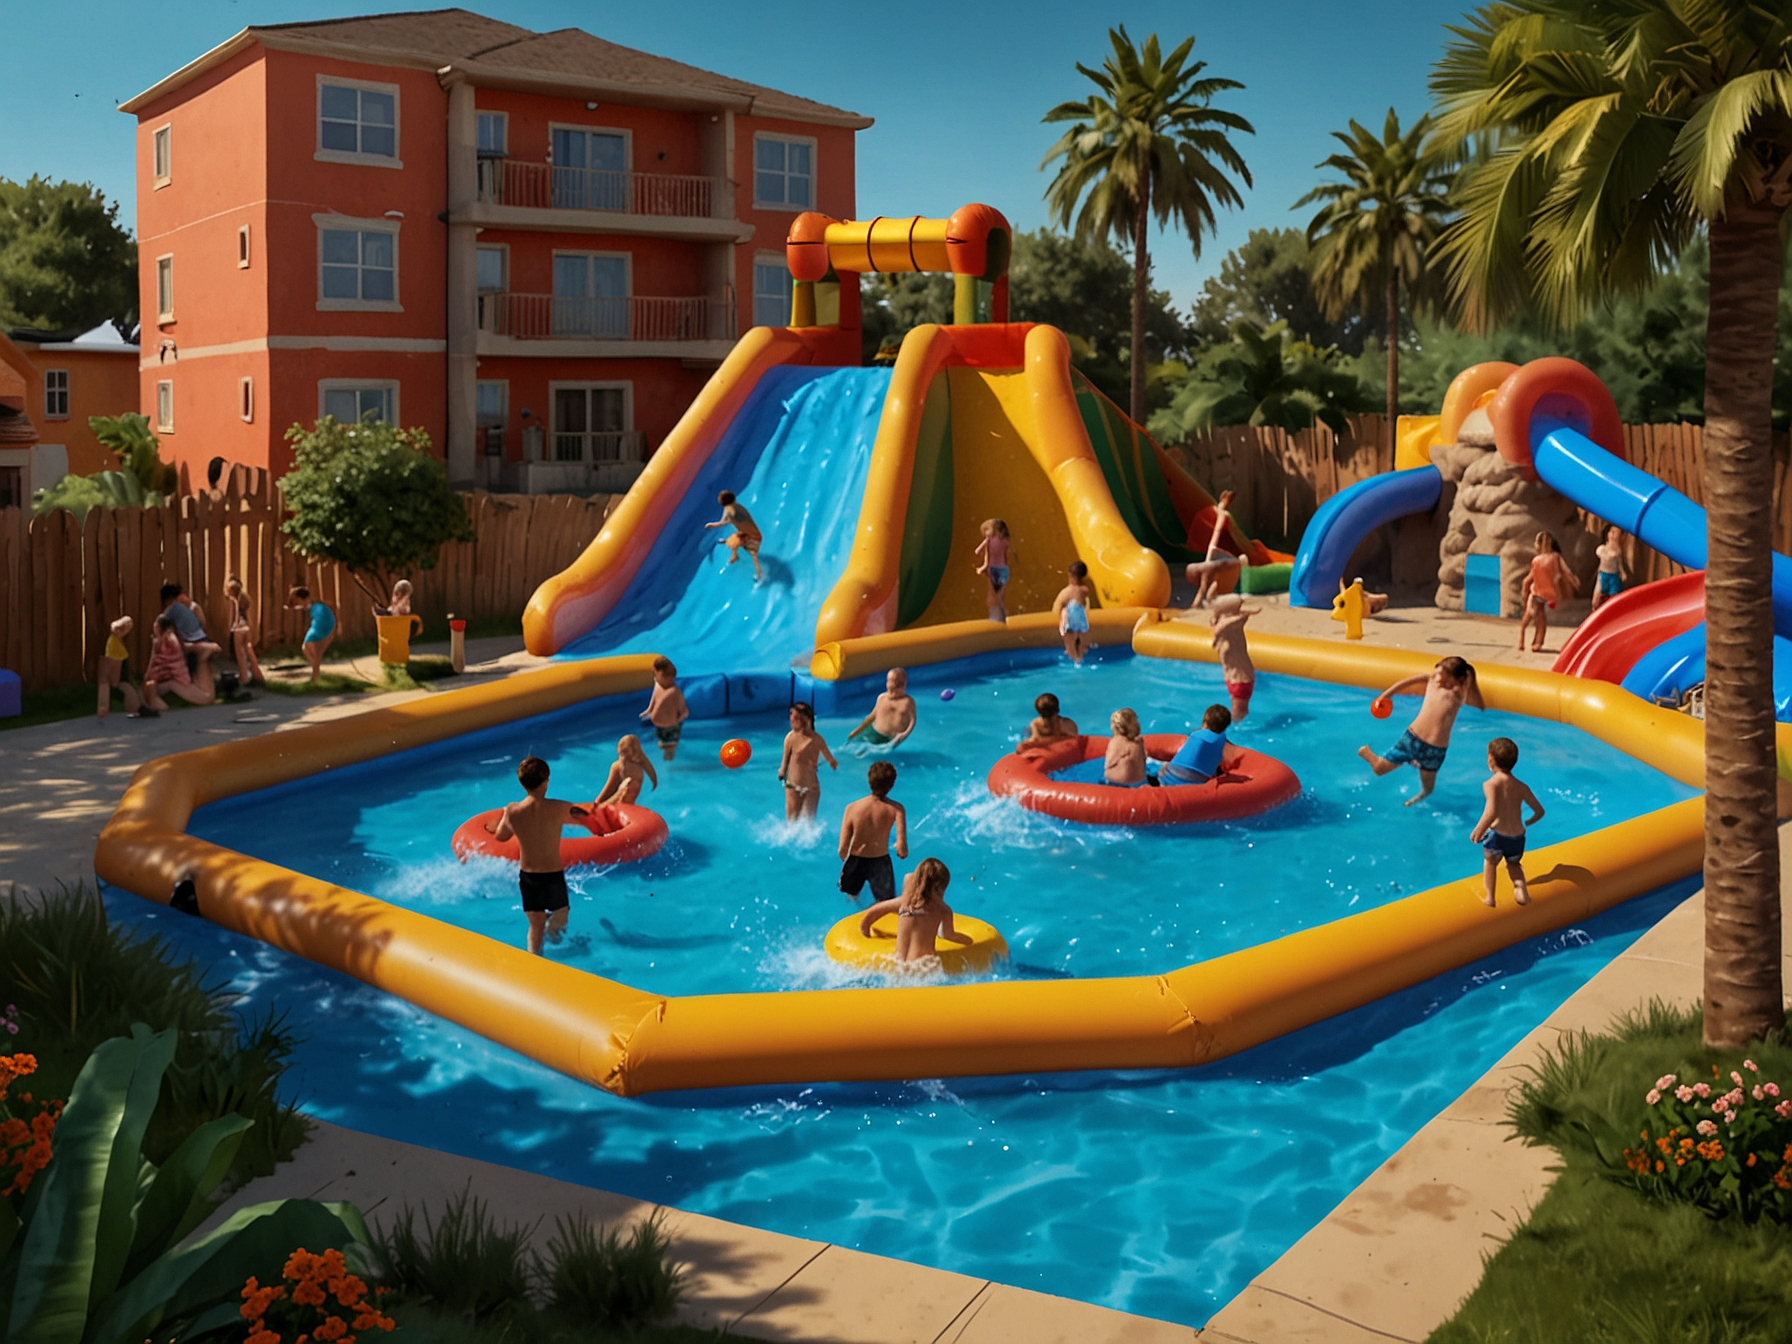 An image of kids playing on the Costway Inflatable Water Park in a backyard, showing vibrant colors, slides, a splash pool, and a climbing wall, capturing the fun and energetic atmosphere.